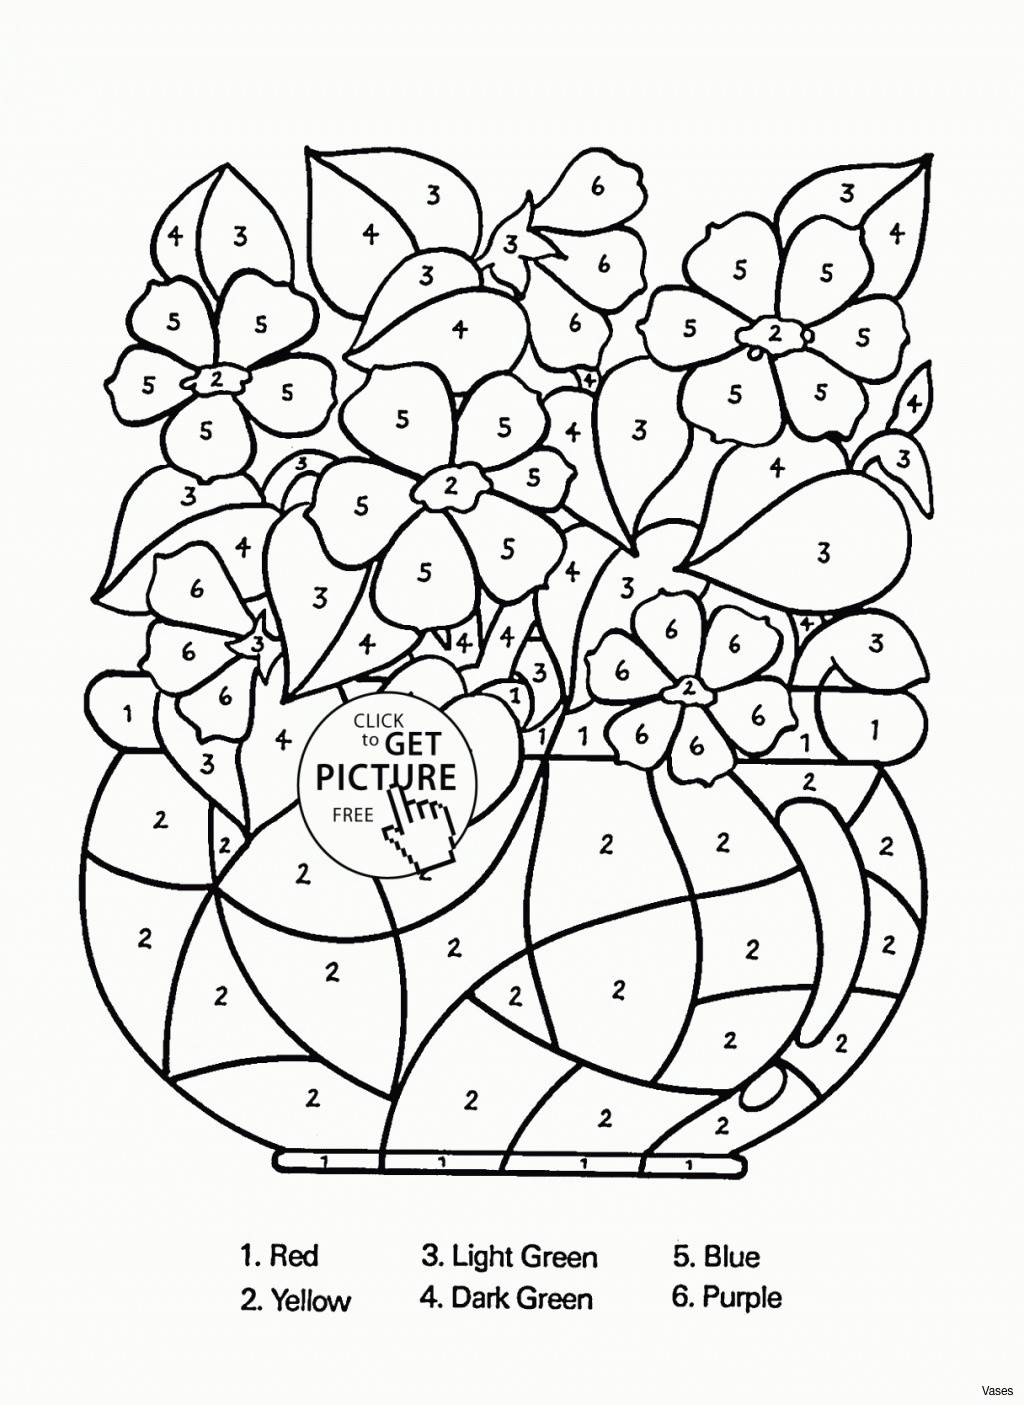 26 Fabulous Face Vases for Sale 2024 free download face vases for sale of 5 elegant unique flower vases pics best roses flower with awesome flowers coloring pages new cool vases flower vase coloring page of 5 elegant unique flower